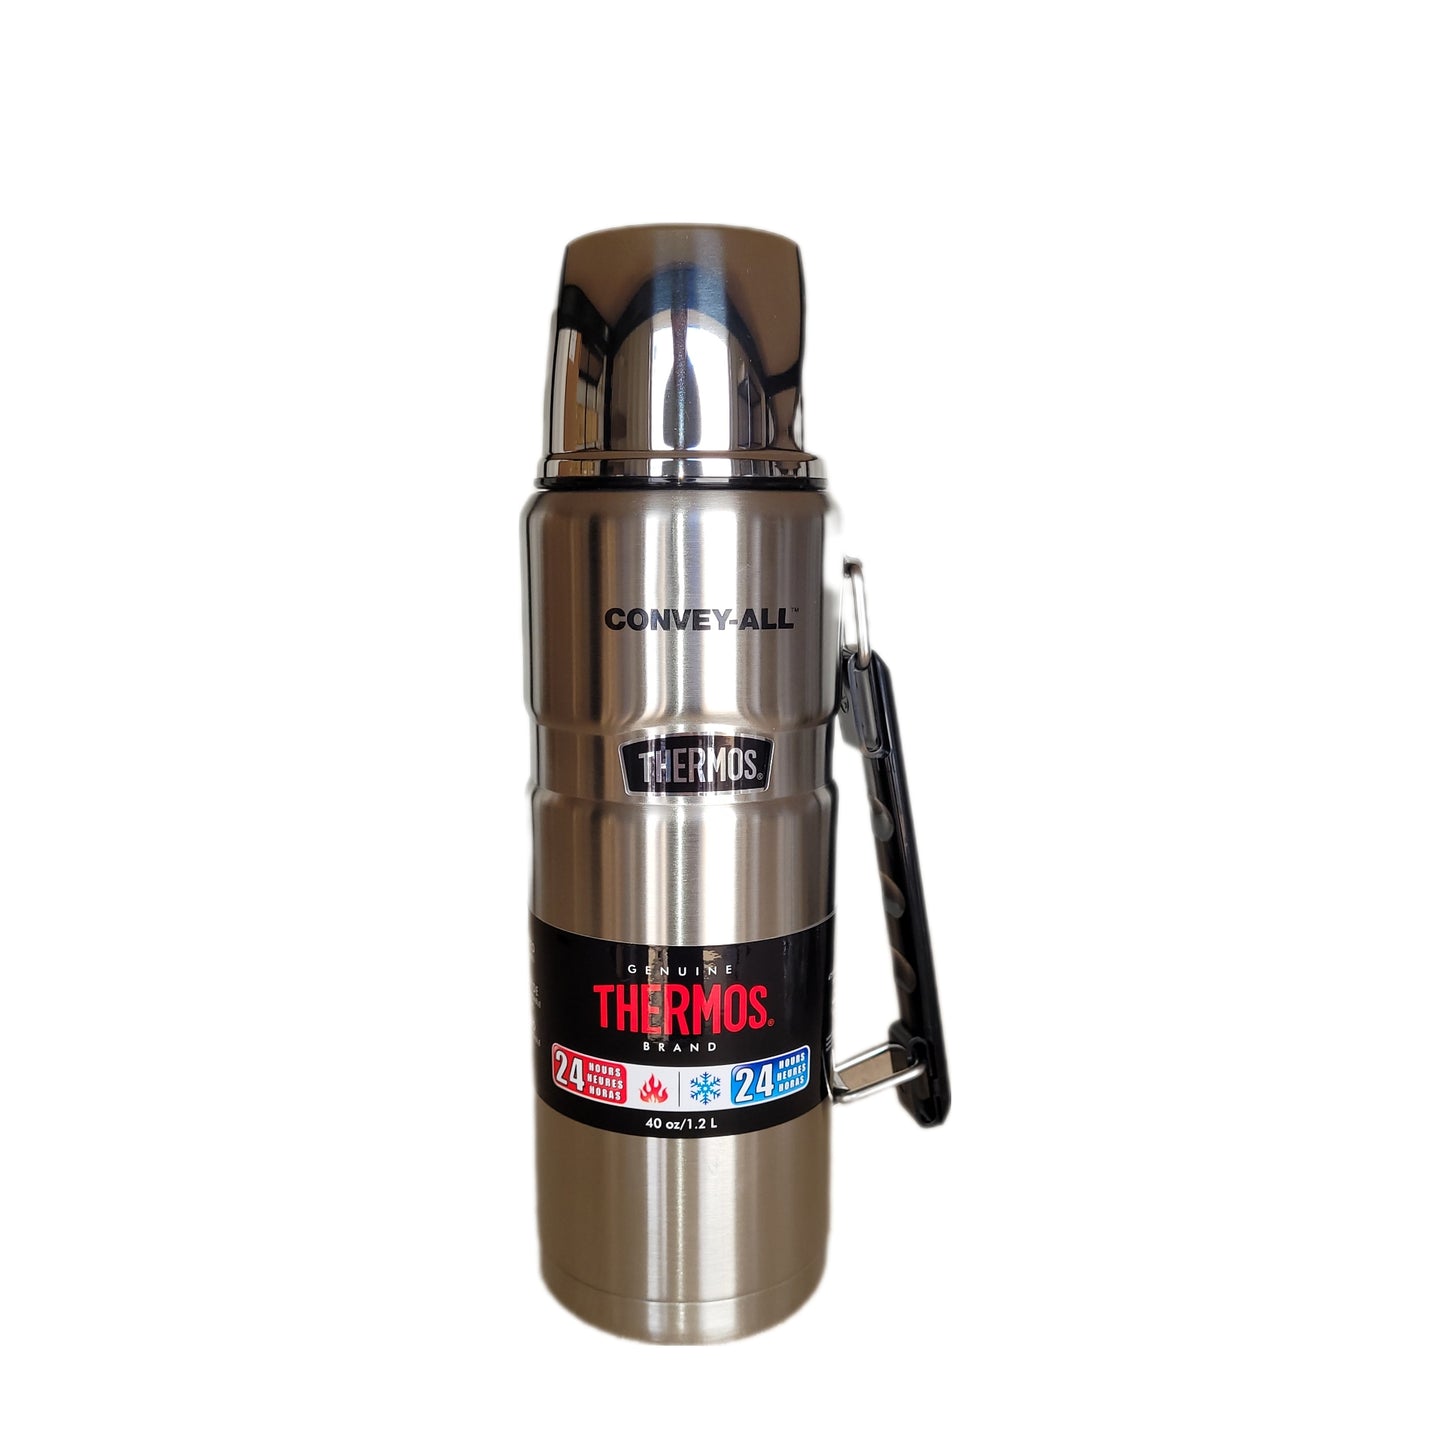 Convey-All Stainless Steel Thermos Beverage Bottle